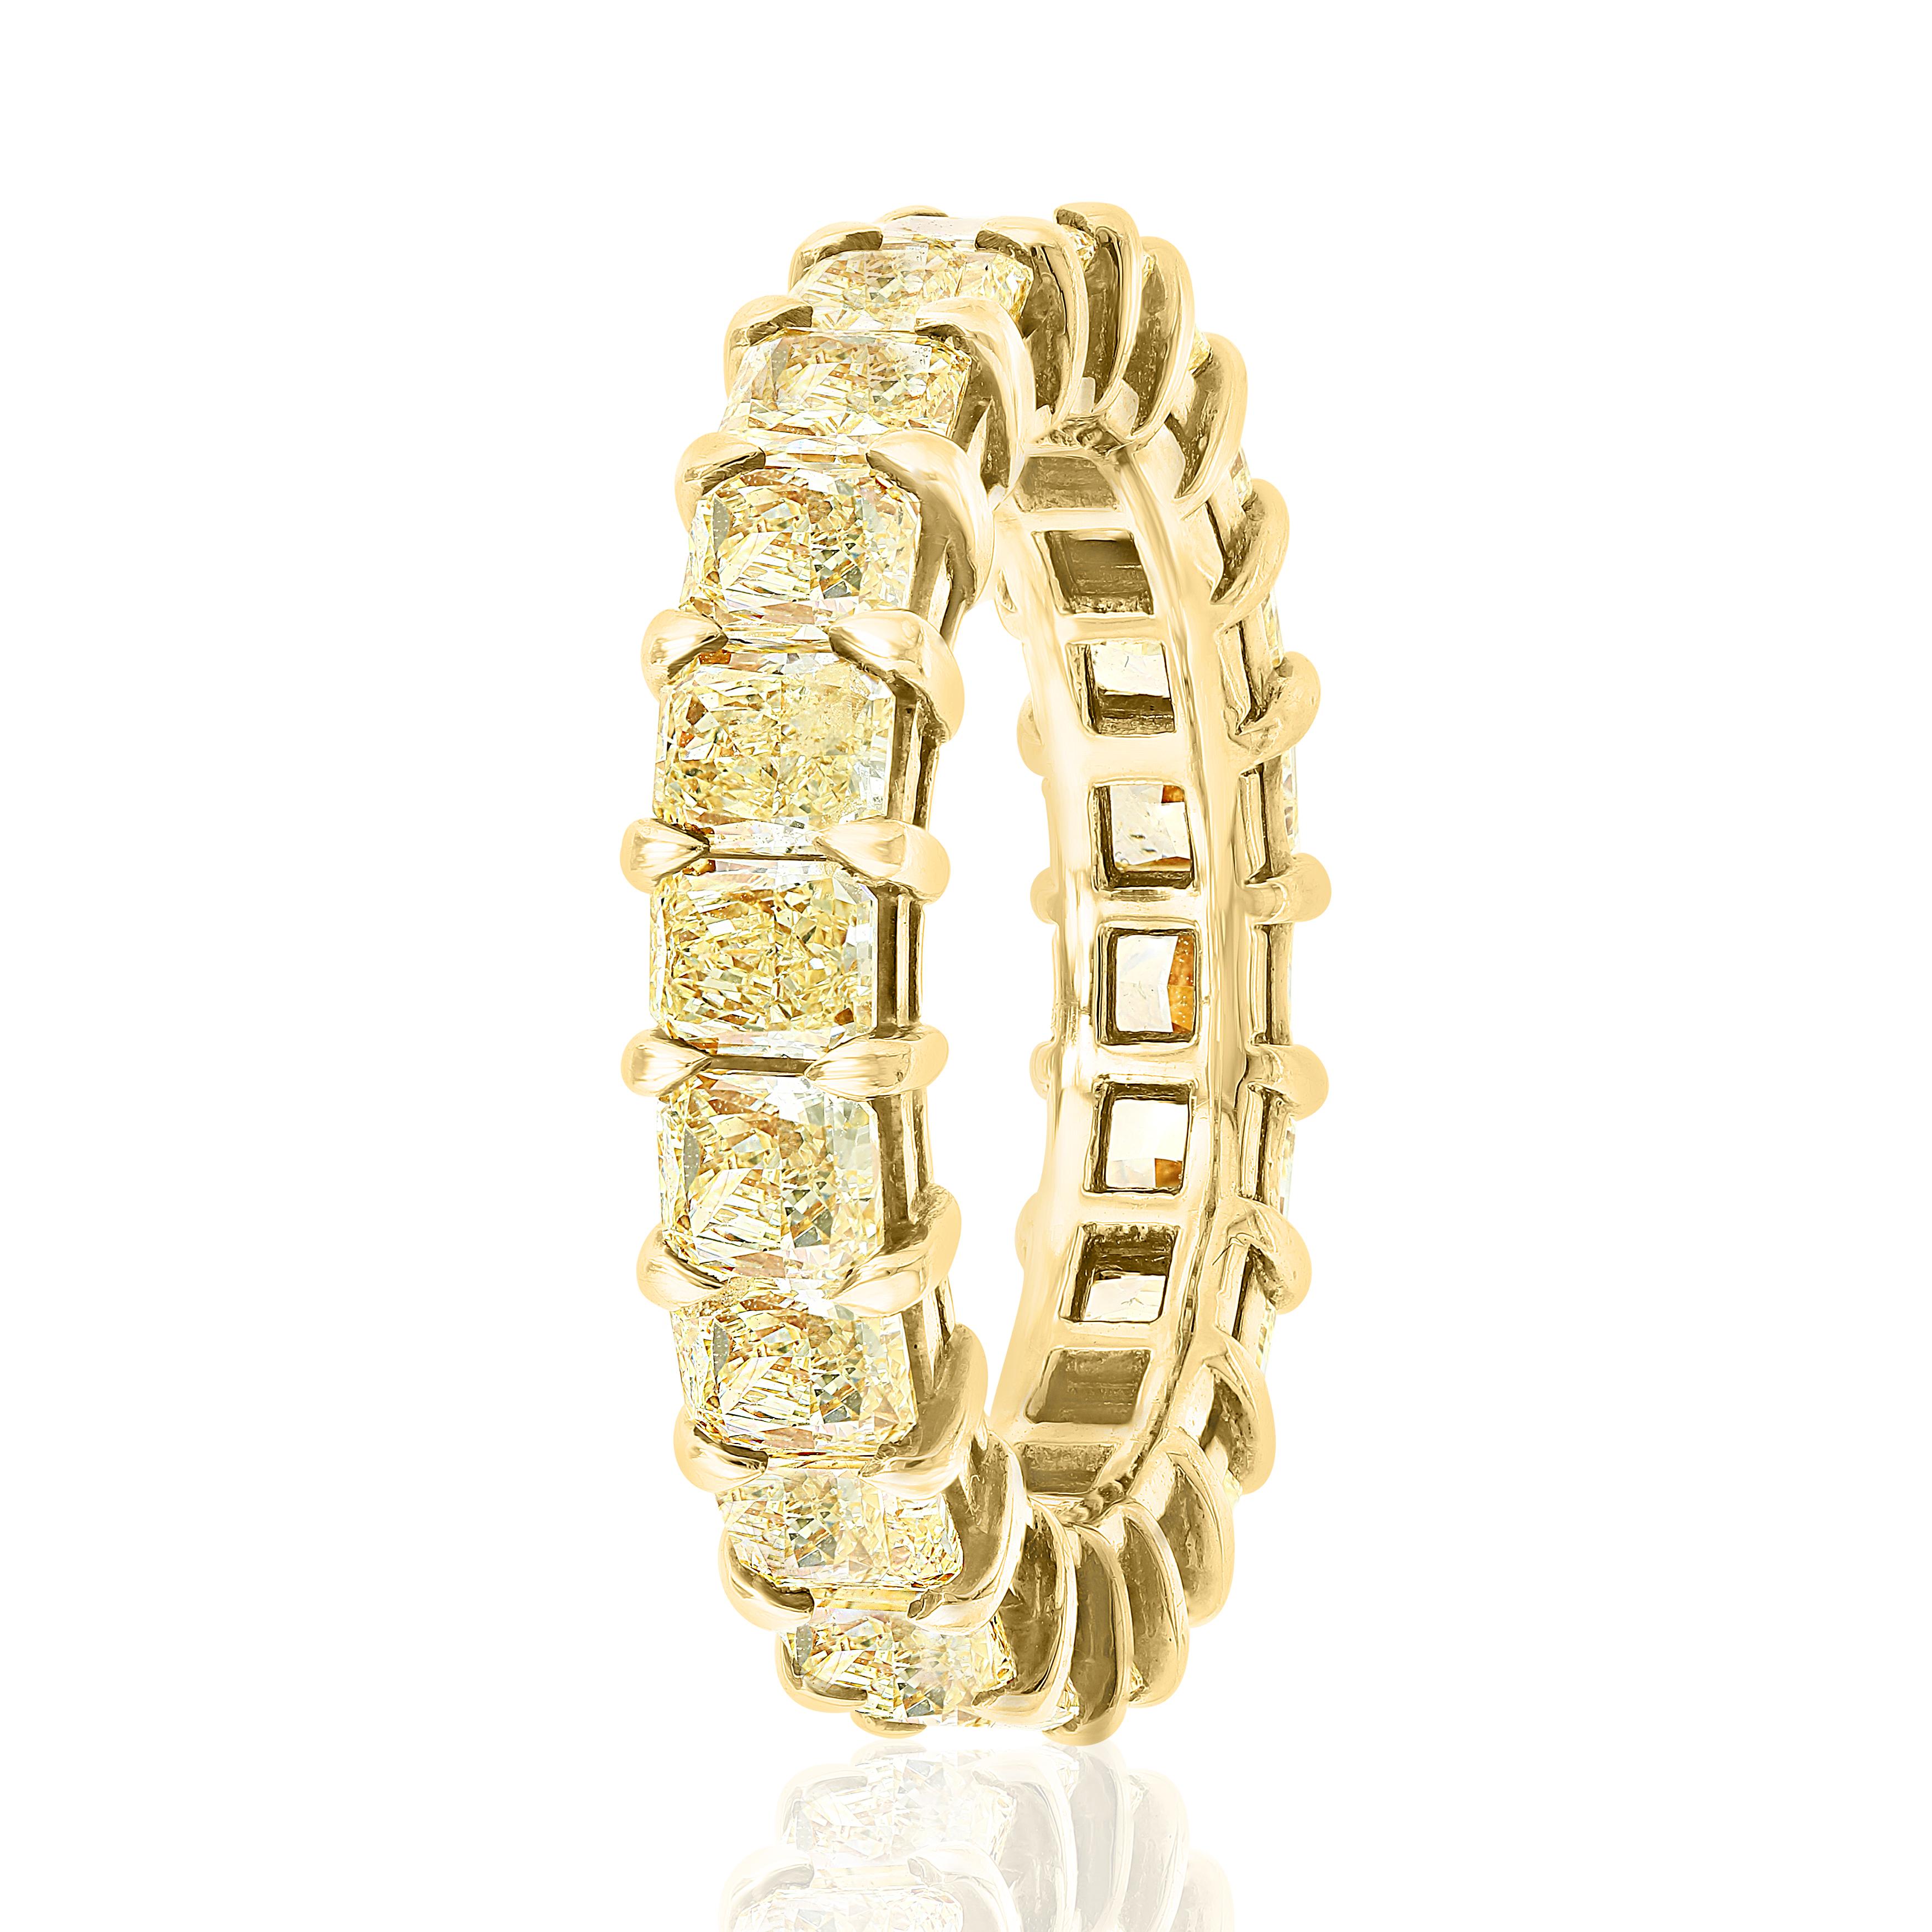 This beautiful and understated Ring features Radiant Cut Yellow Diamonds.
22 Yellow Diamonds weigh 3.89 Carats.
Set in 18 Karat Yellow Gold.
Finger Size 6